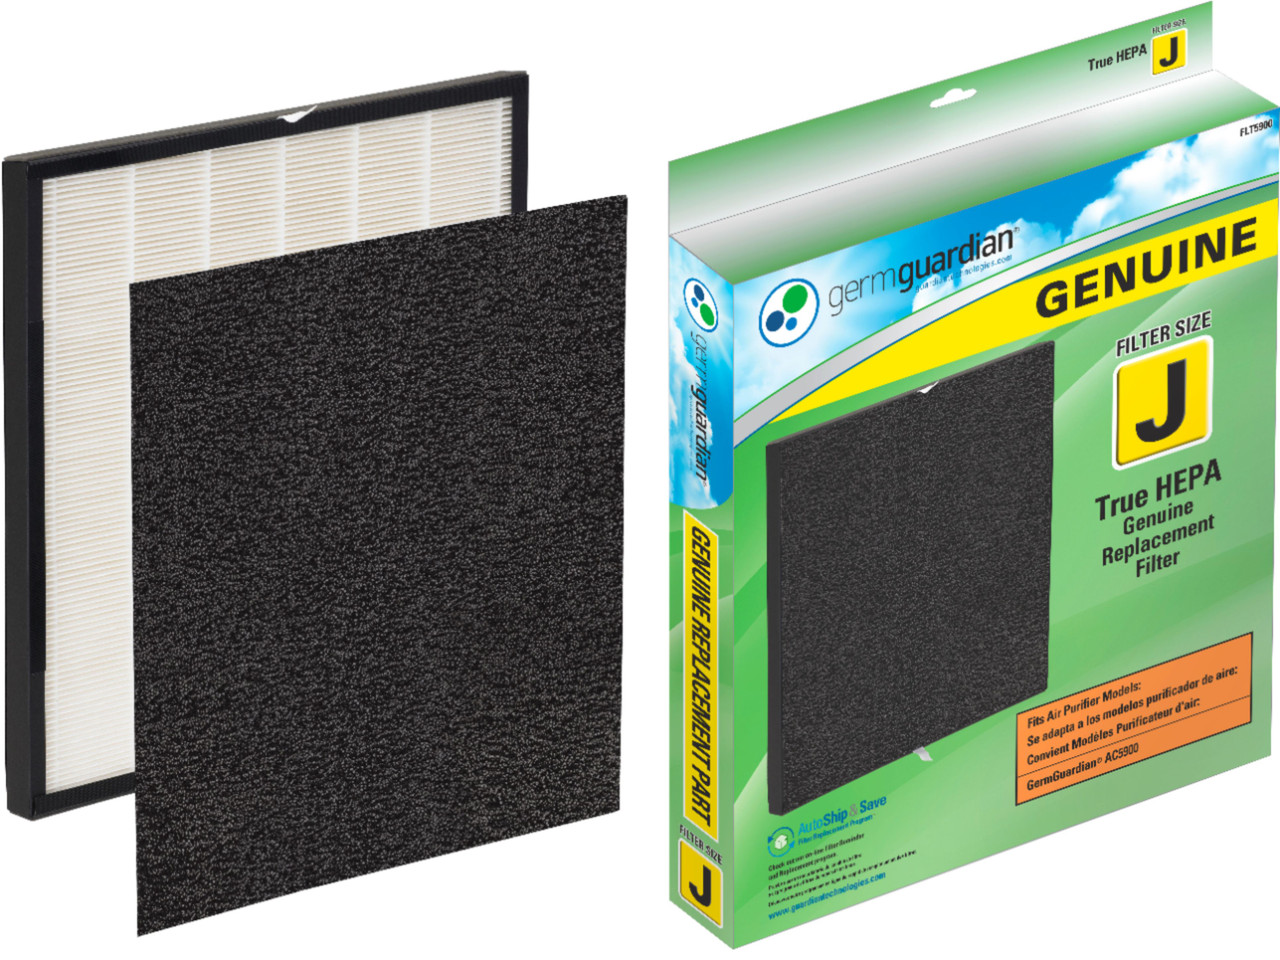 GermGuardian - True HEPA GENUINE Replacement Filter for GermGuardian Air Purifier - White With Black Border